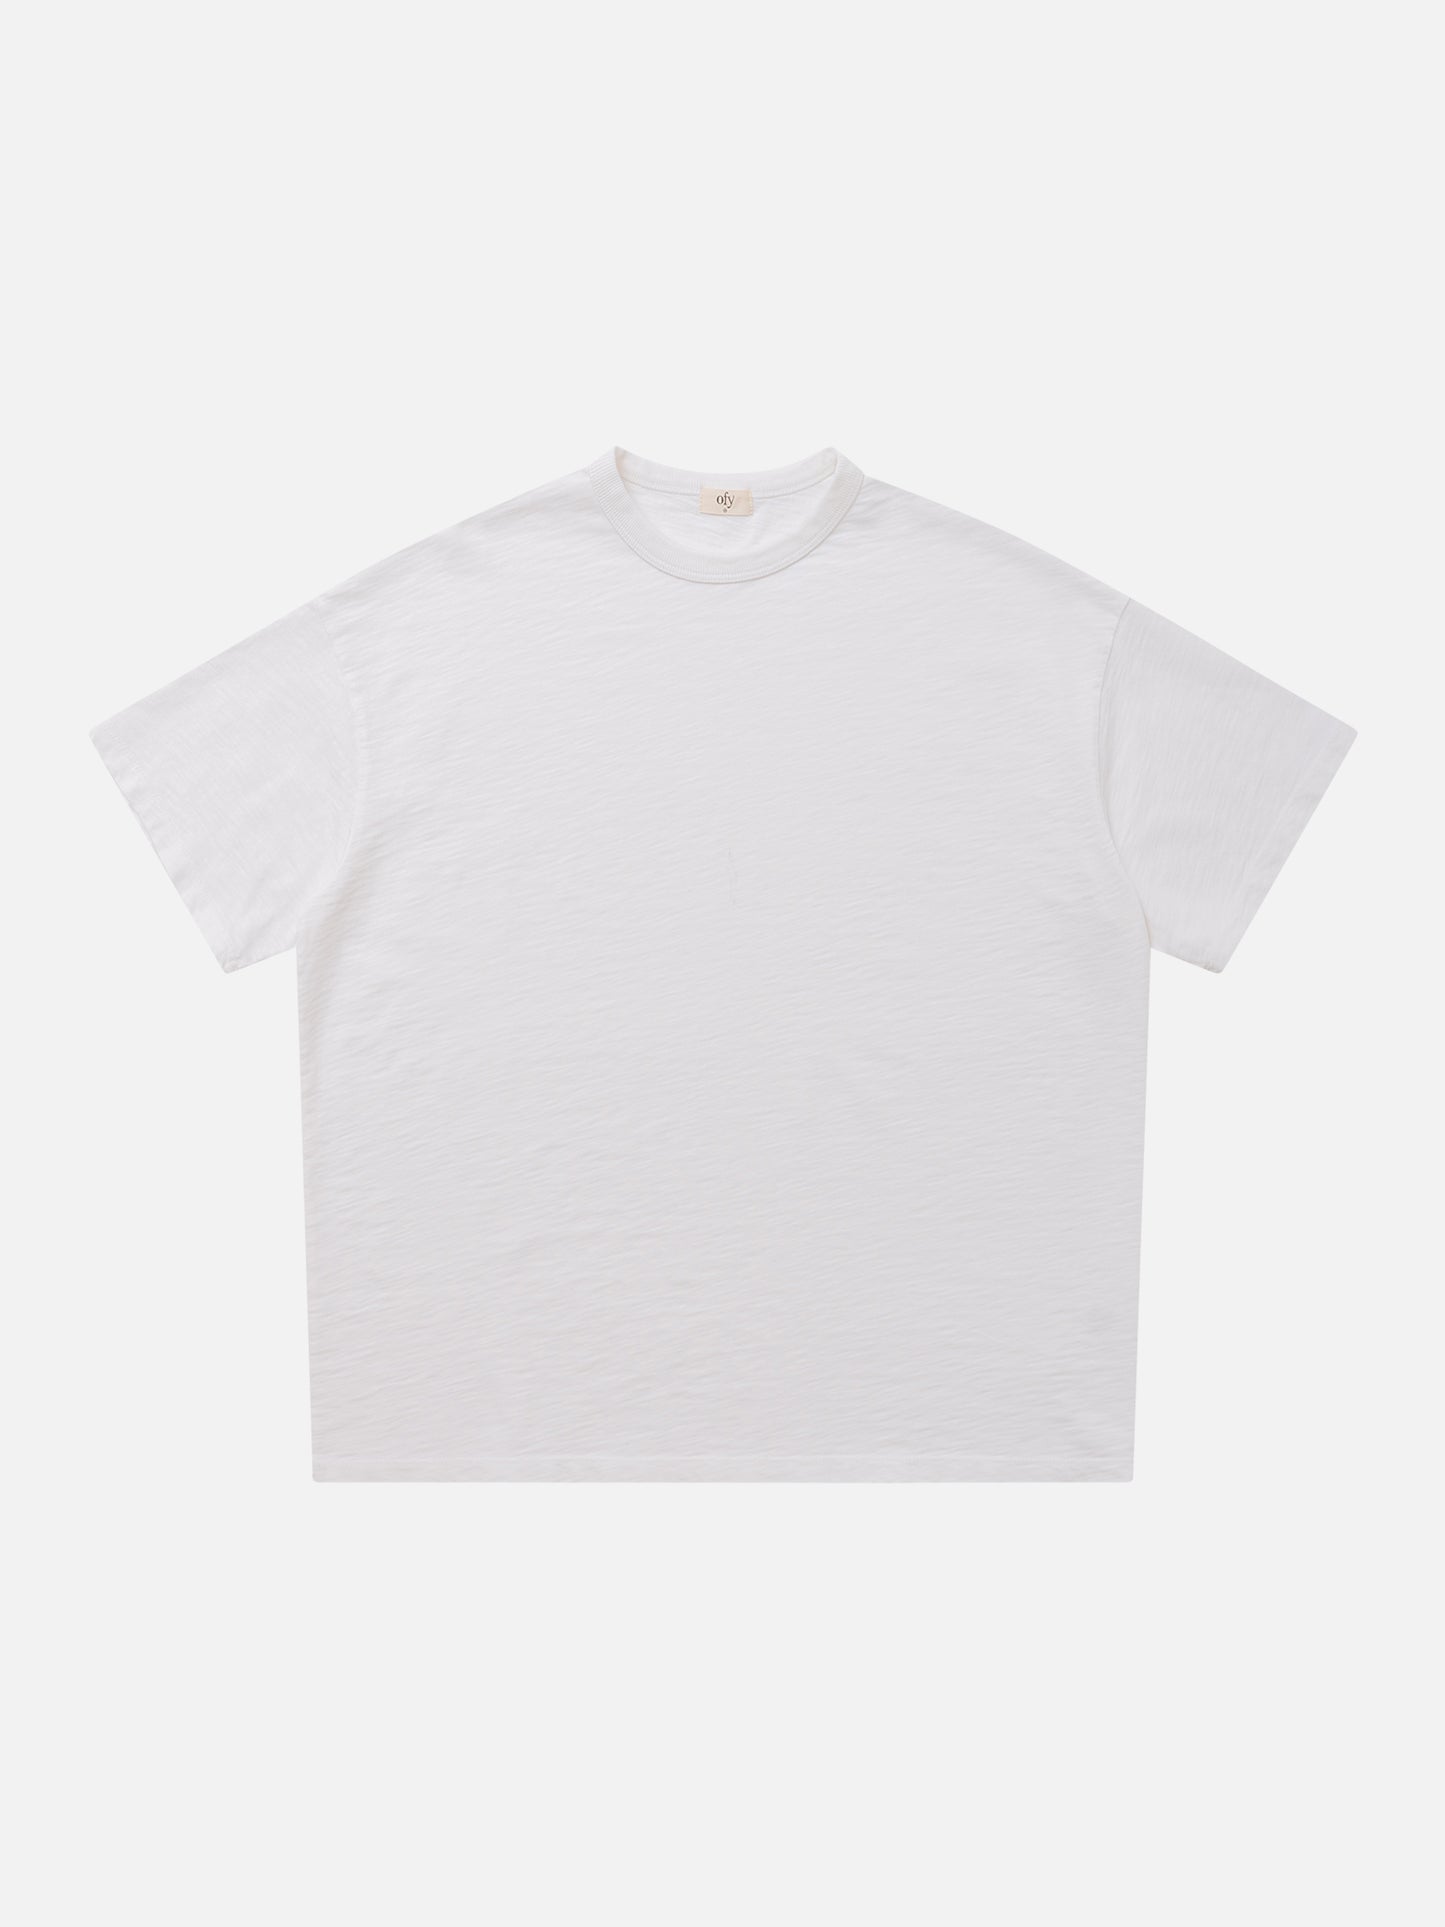 Journey Tee - Lucent White